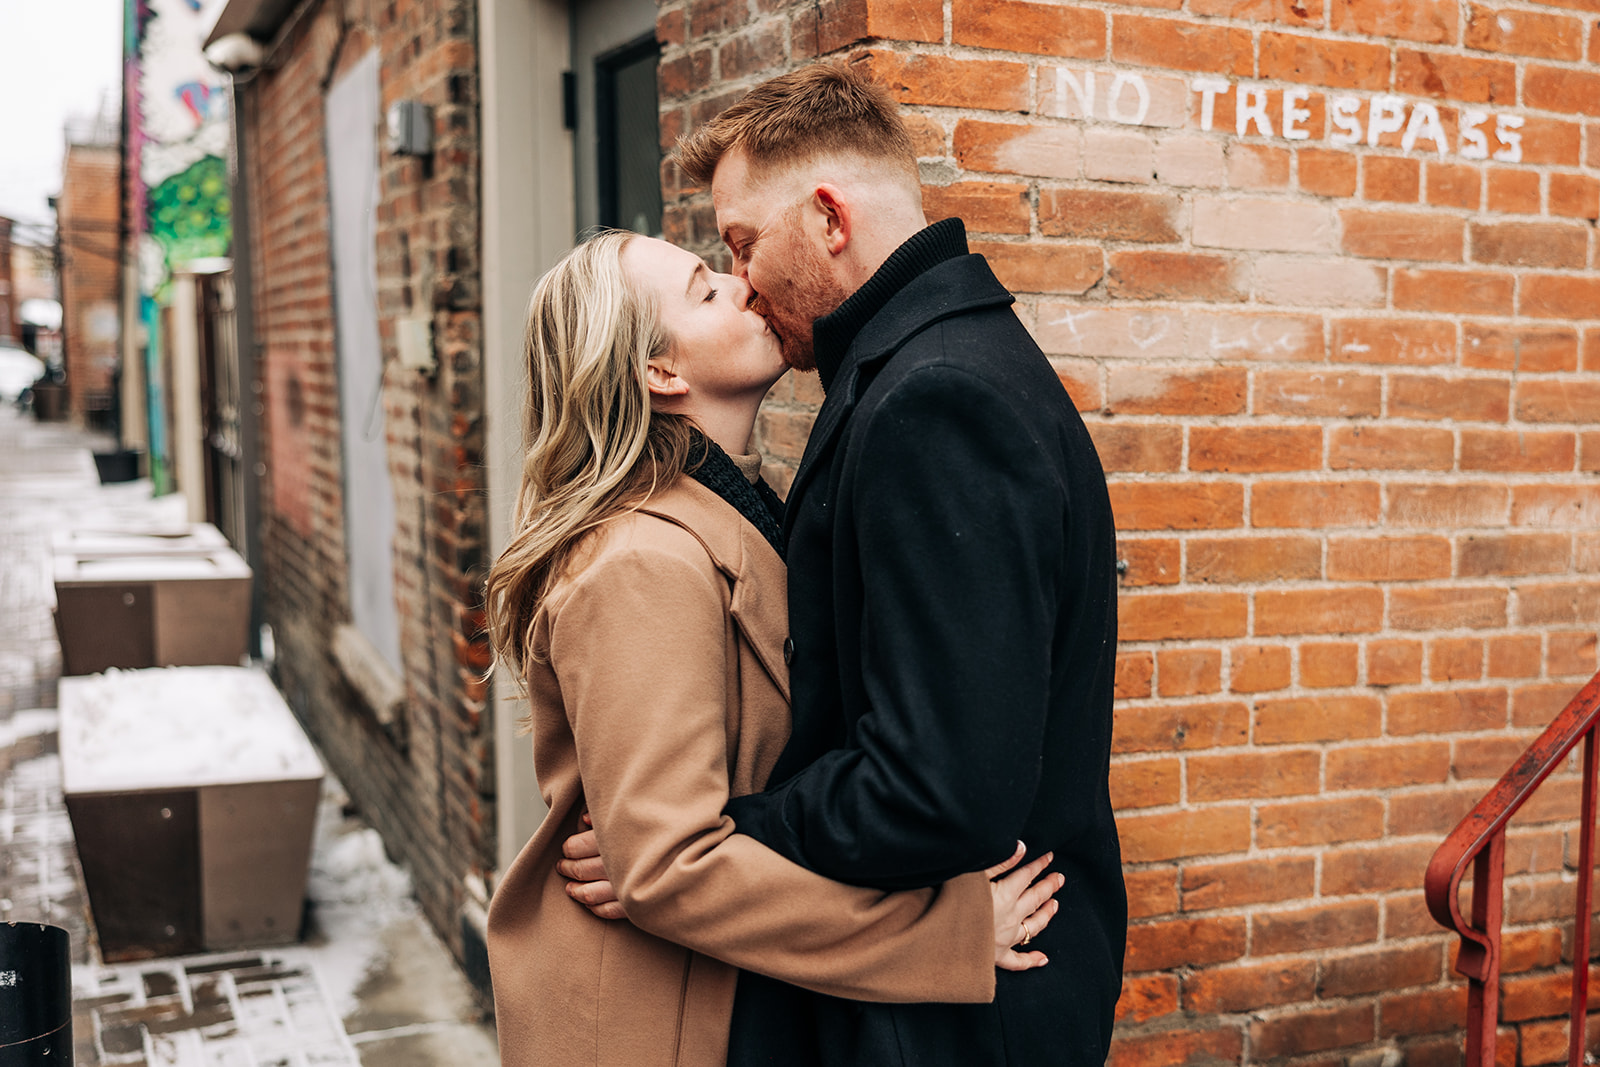 man and woman kissing next to a no trespassing sing